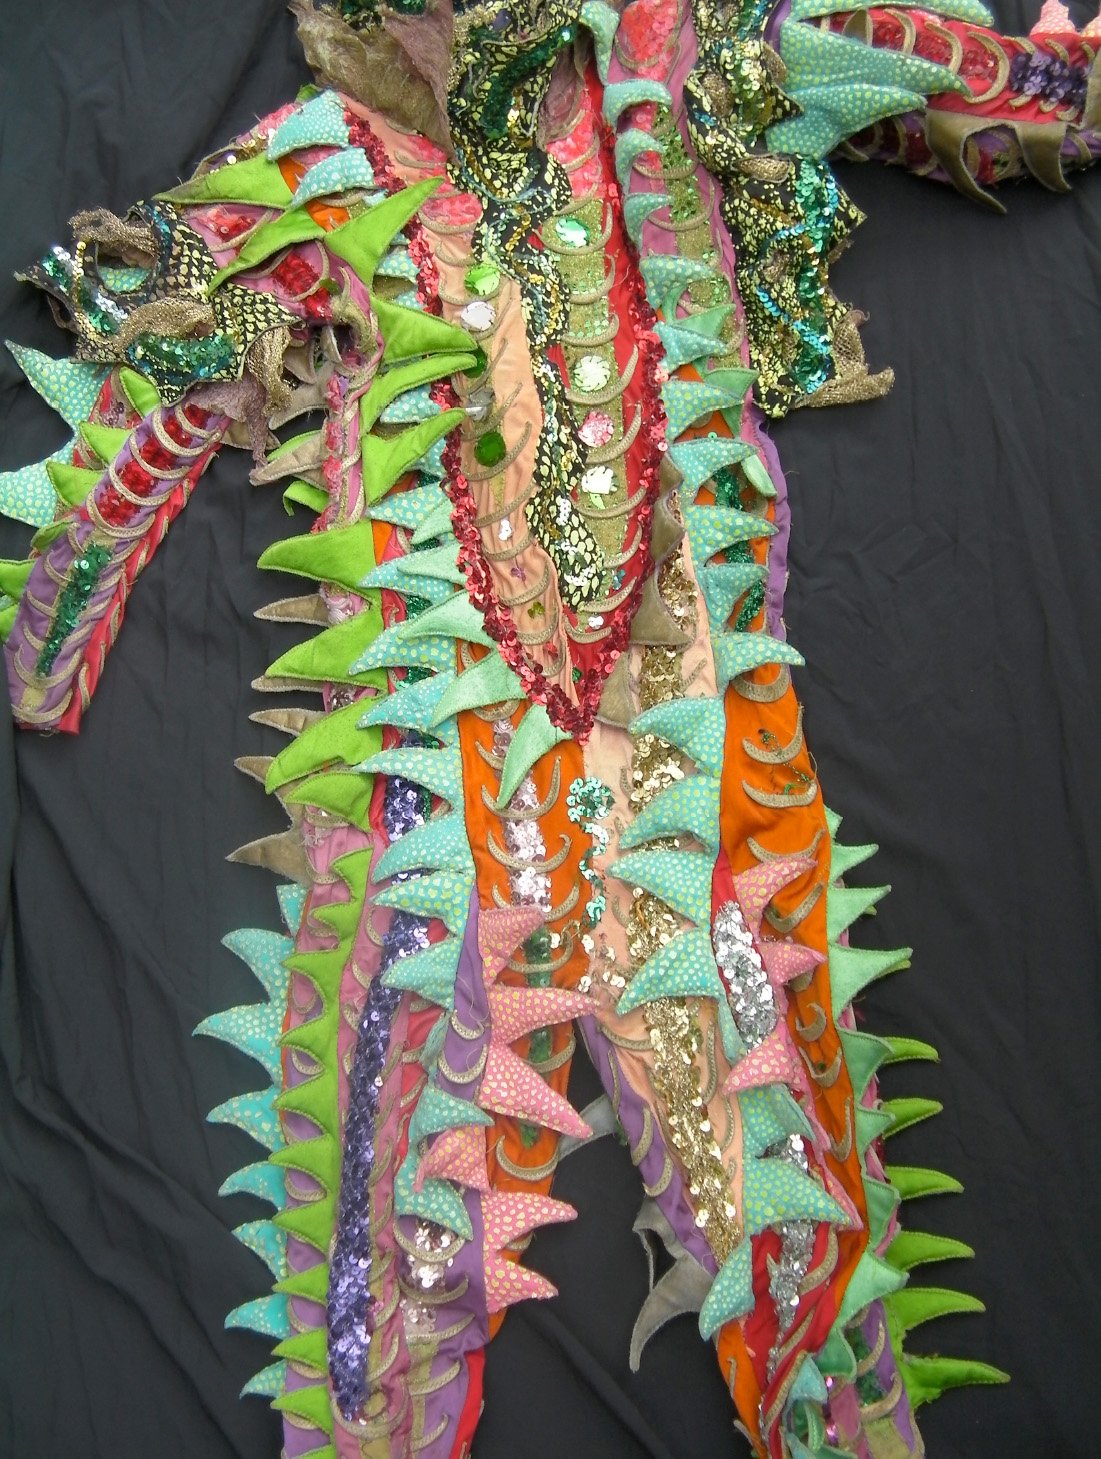 A close up of the Chameleon costume